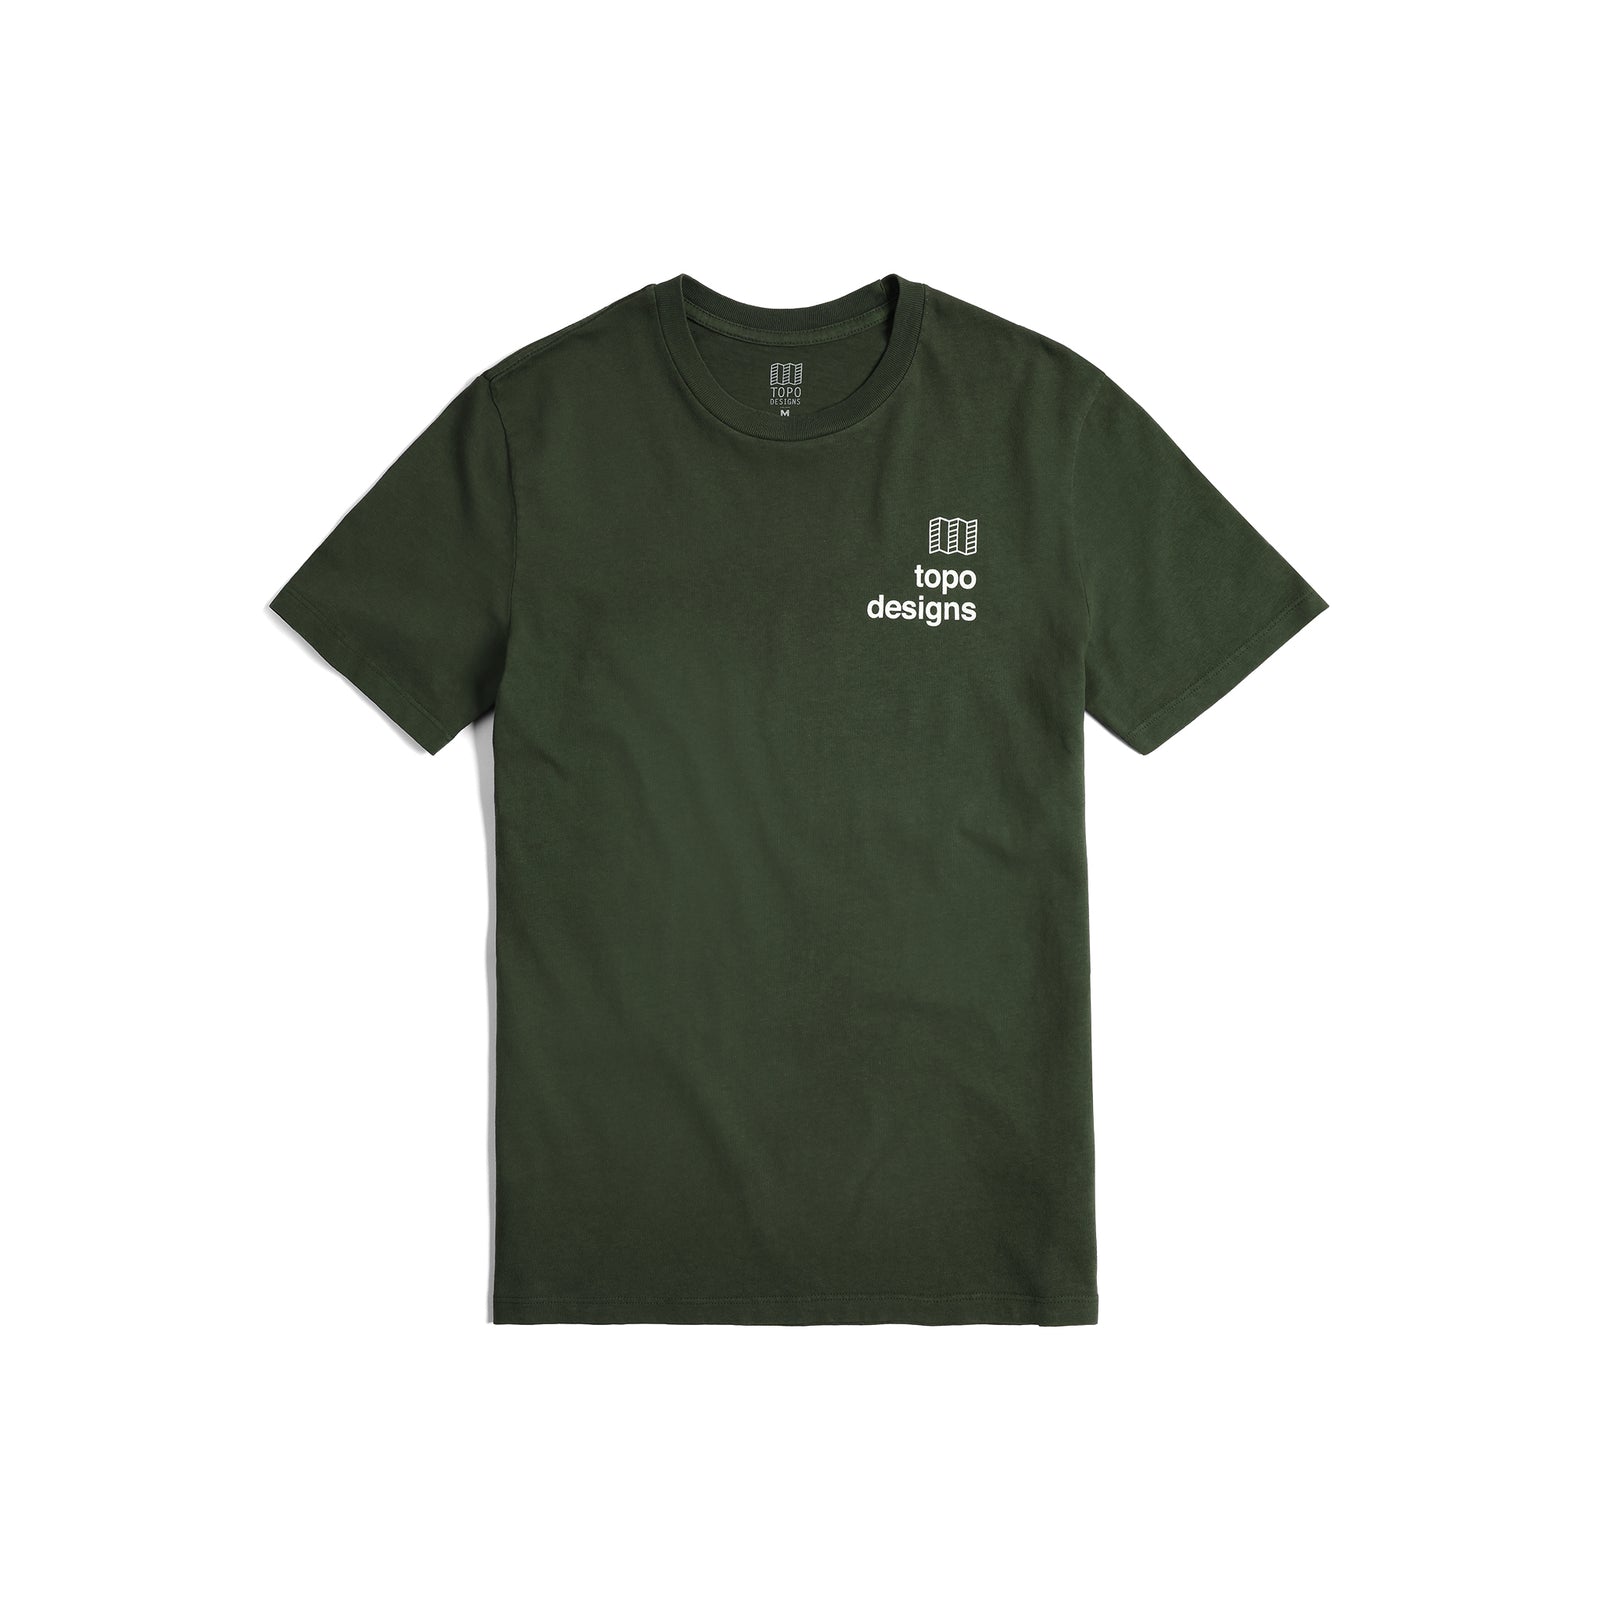 Front View of Topo Designs Ellipse Tee - Men's in "Olive"